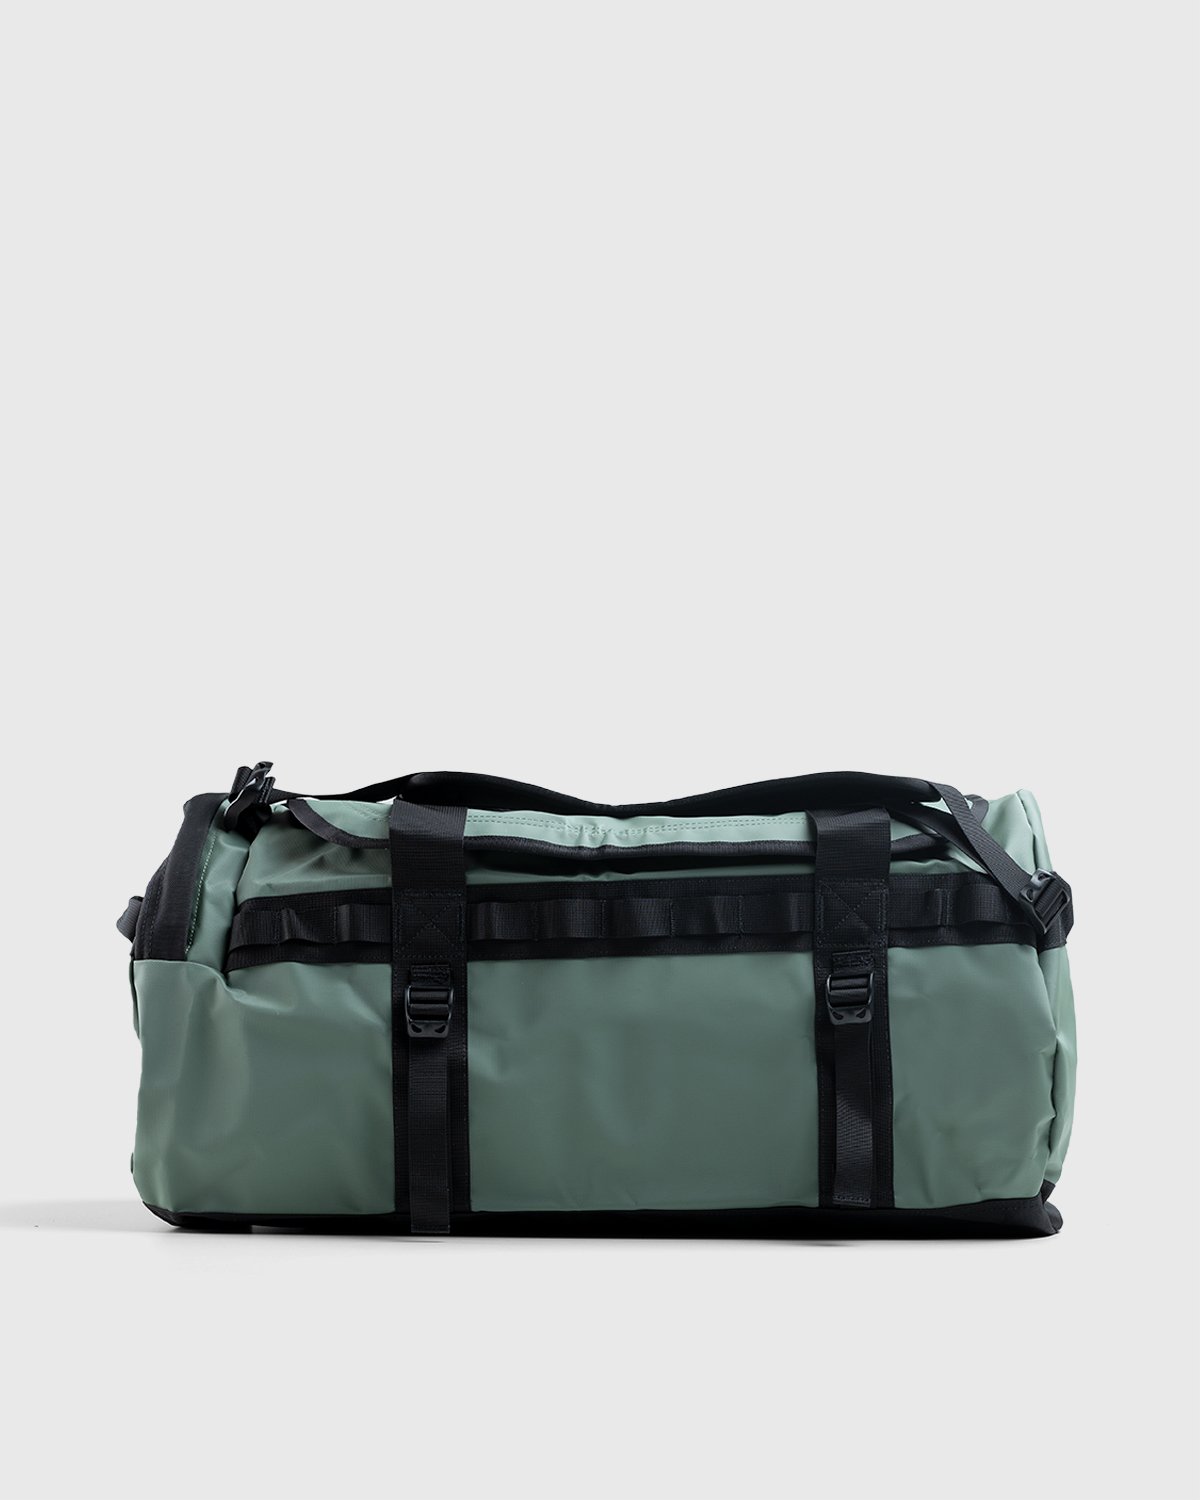 The North Face - Medium Base Camp Duffel - Accessories - Green - Image 3